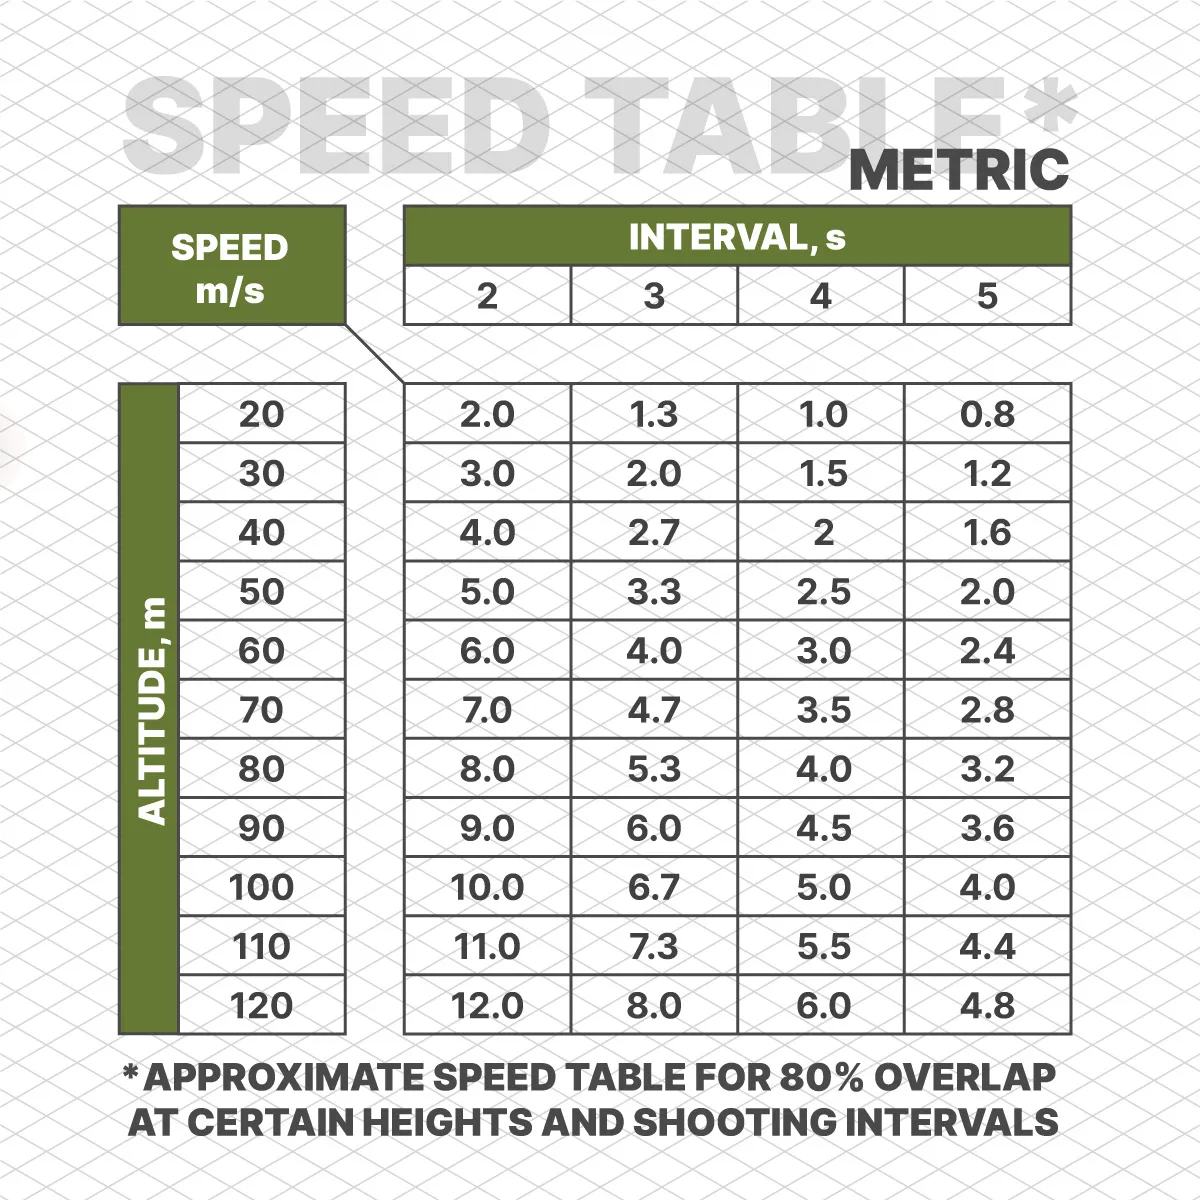 Altitude-Interval-Speed-Table-Metric